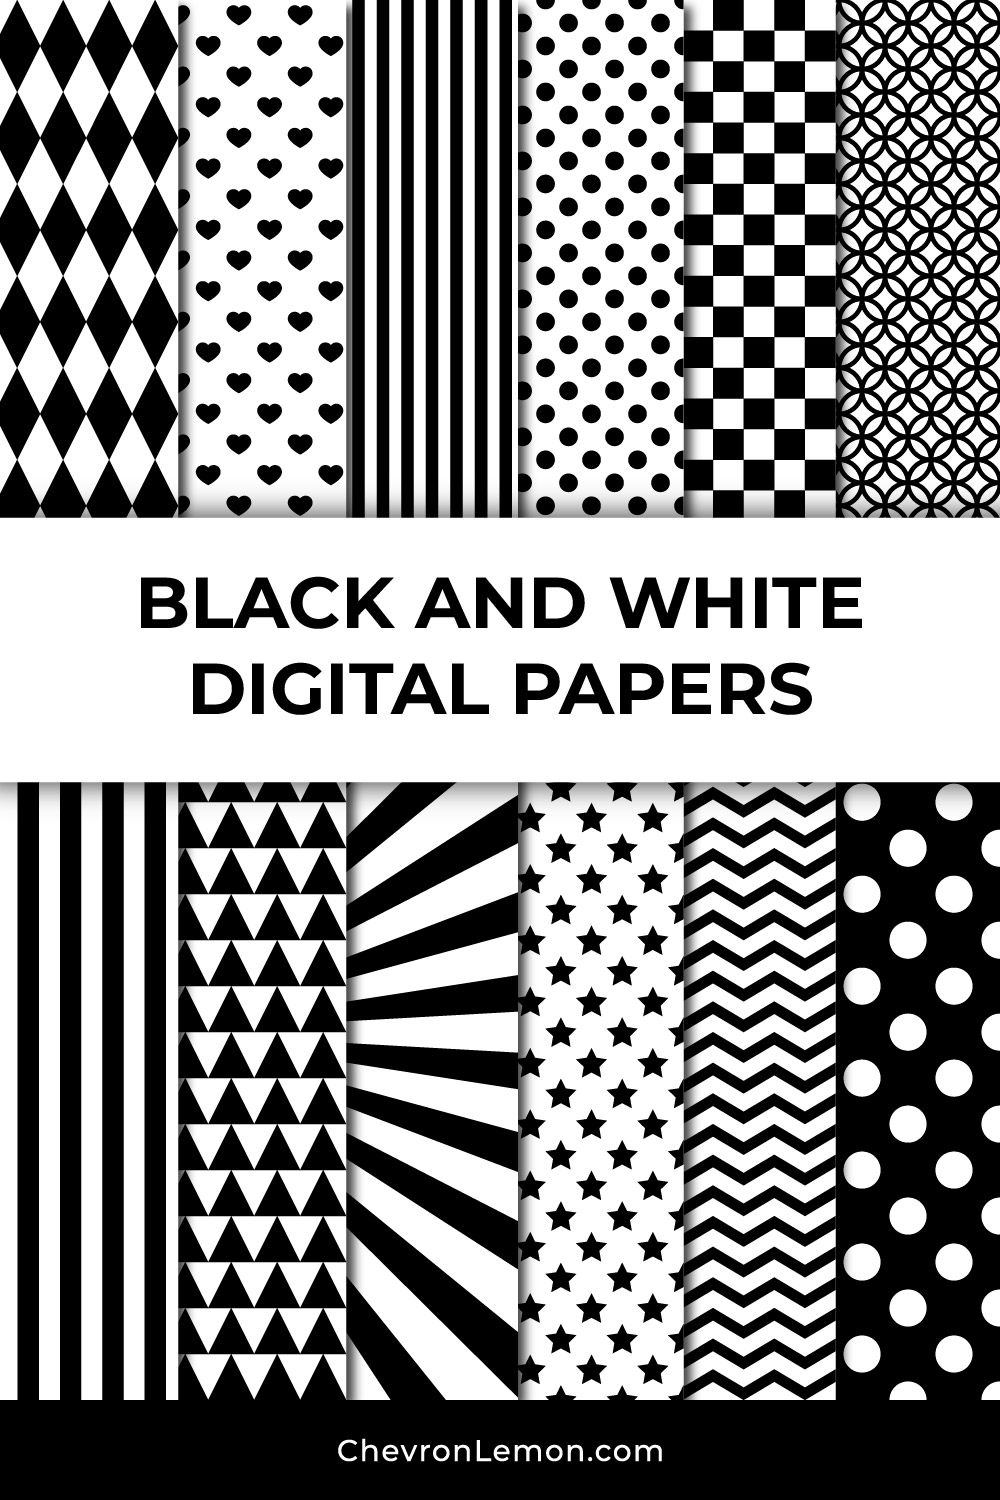 Black Polka Dot Digital Paper: White and Black Digital Paper, Black and  White Printable Patterns, Black and White Scrapbook Paper (Instant  Download) 